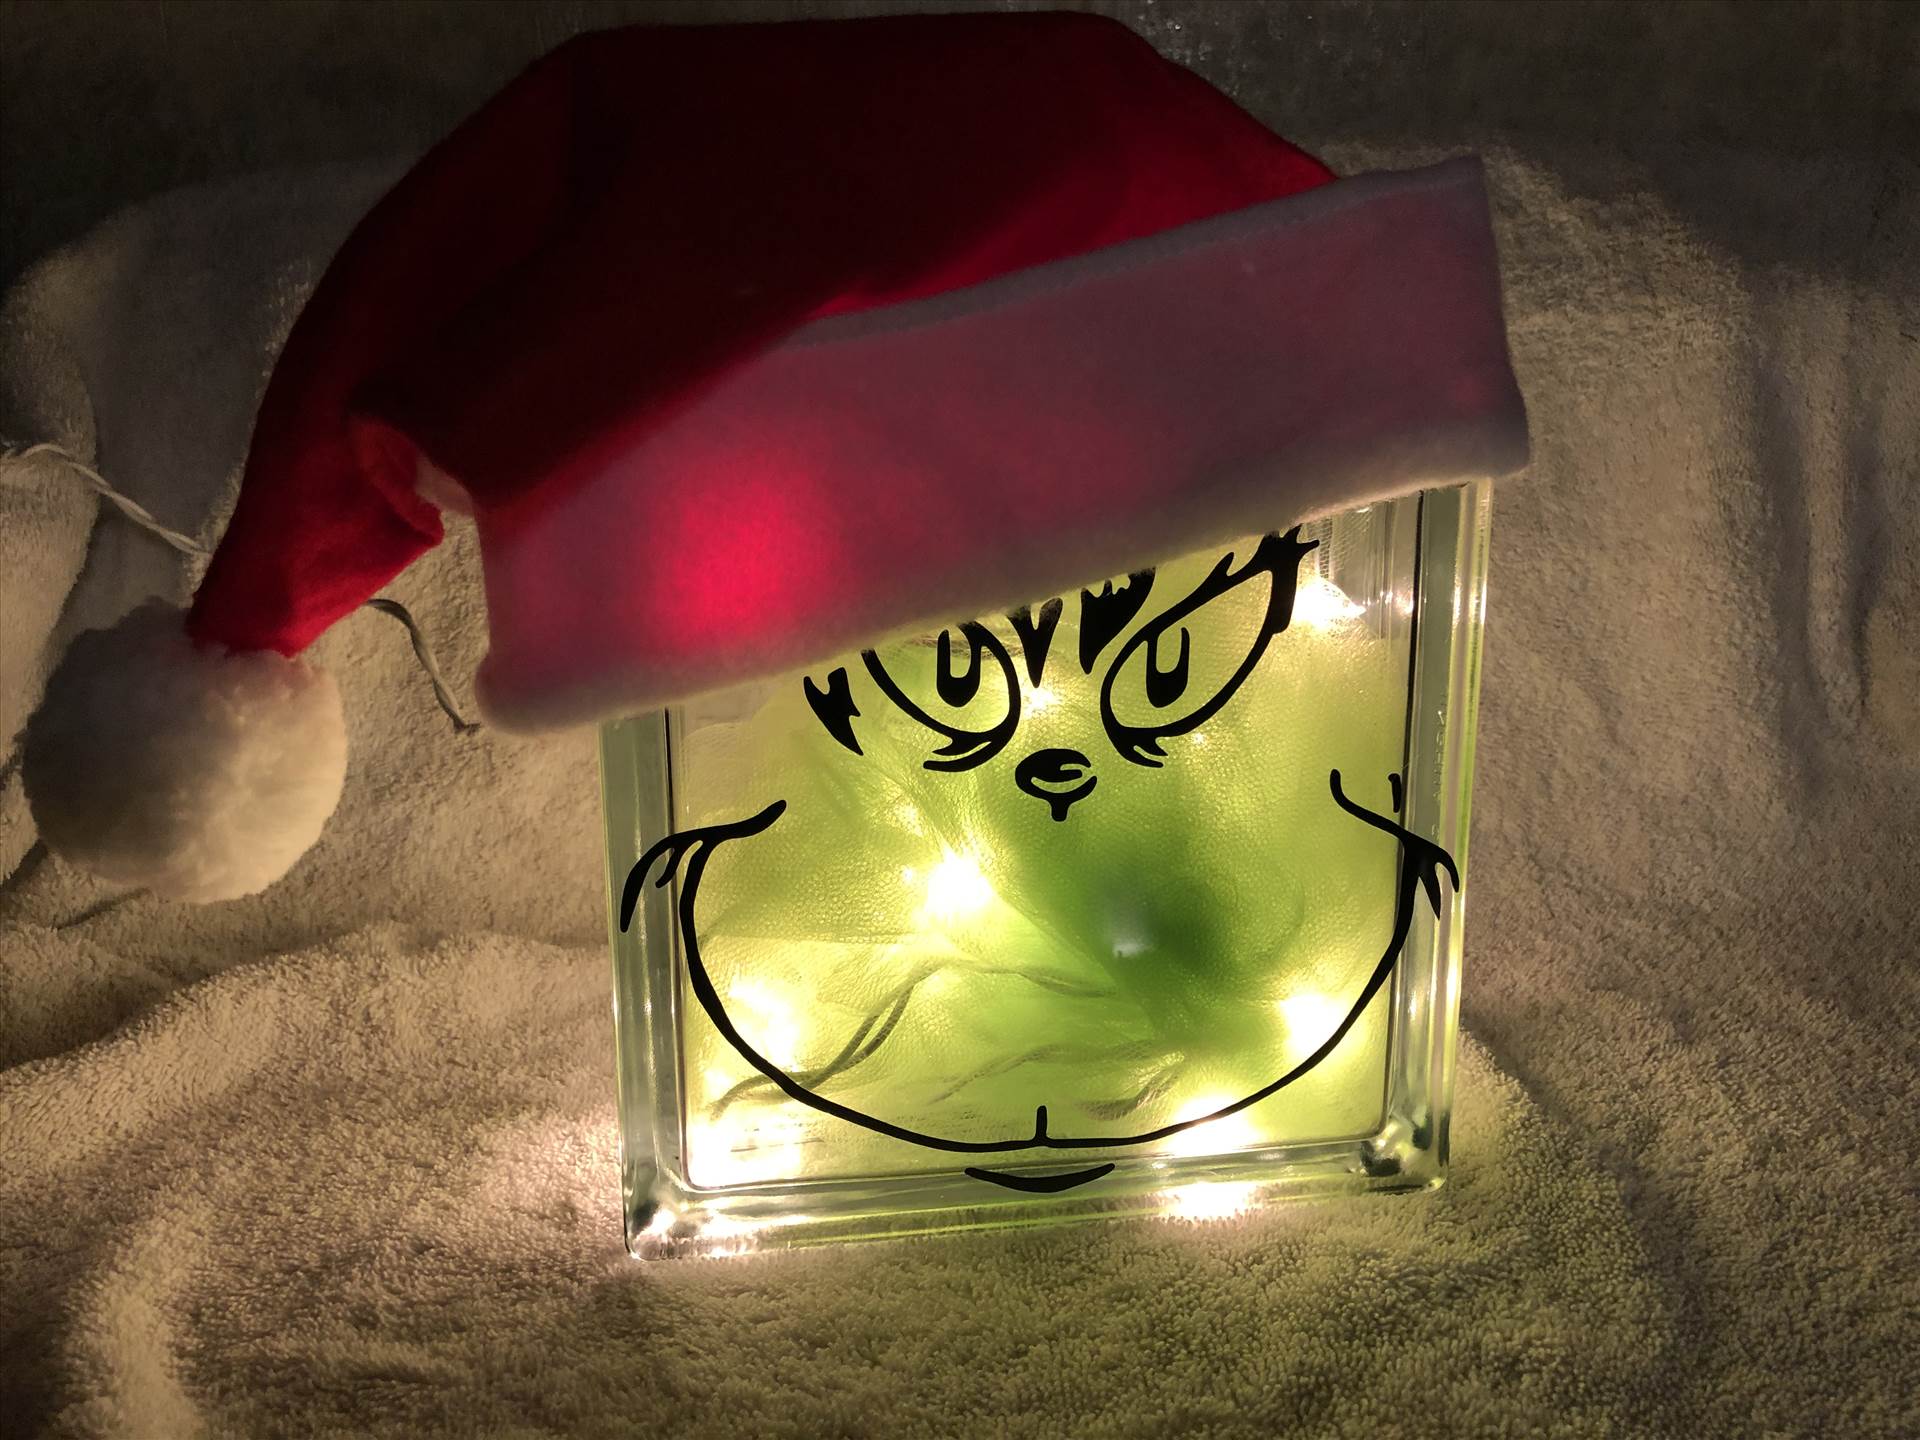 grinch_complete.jpg  by Michael